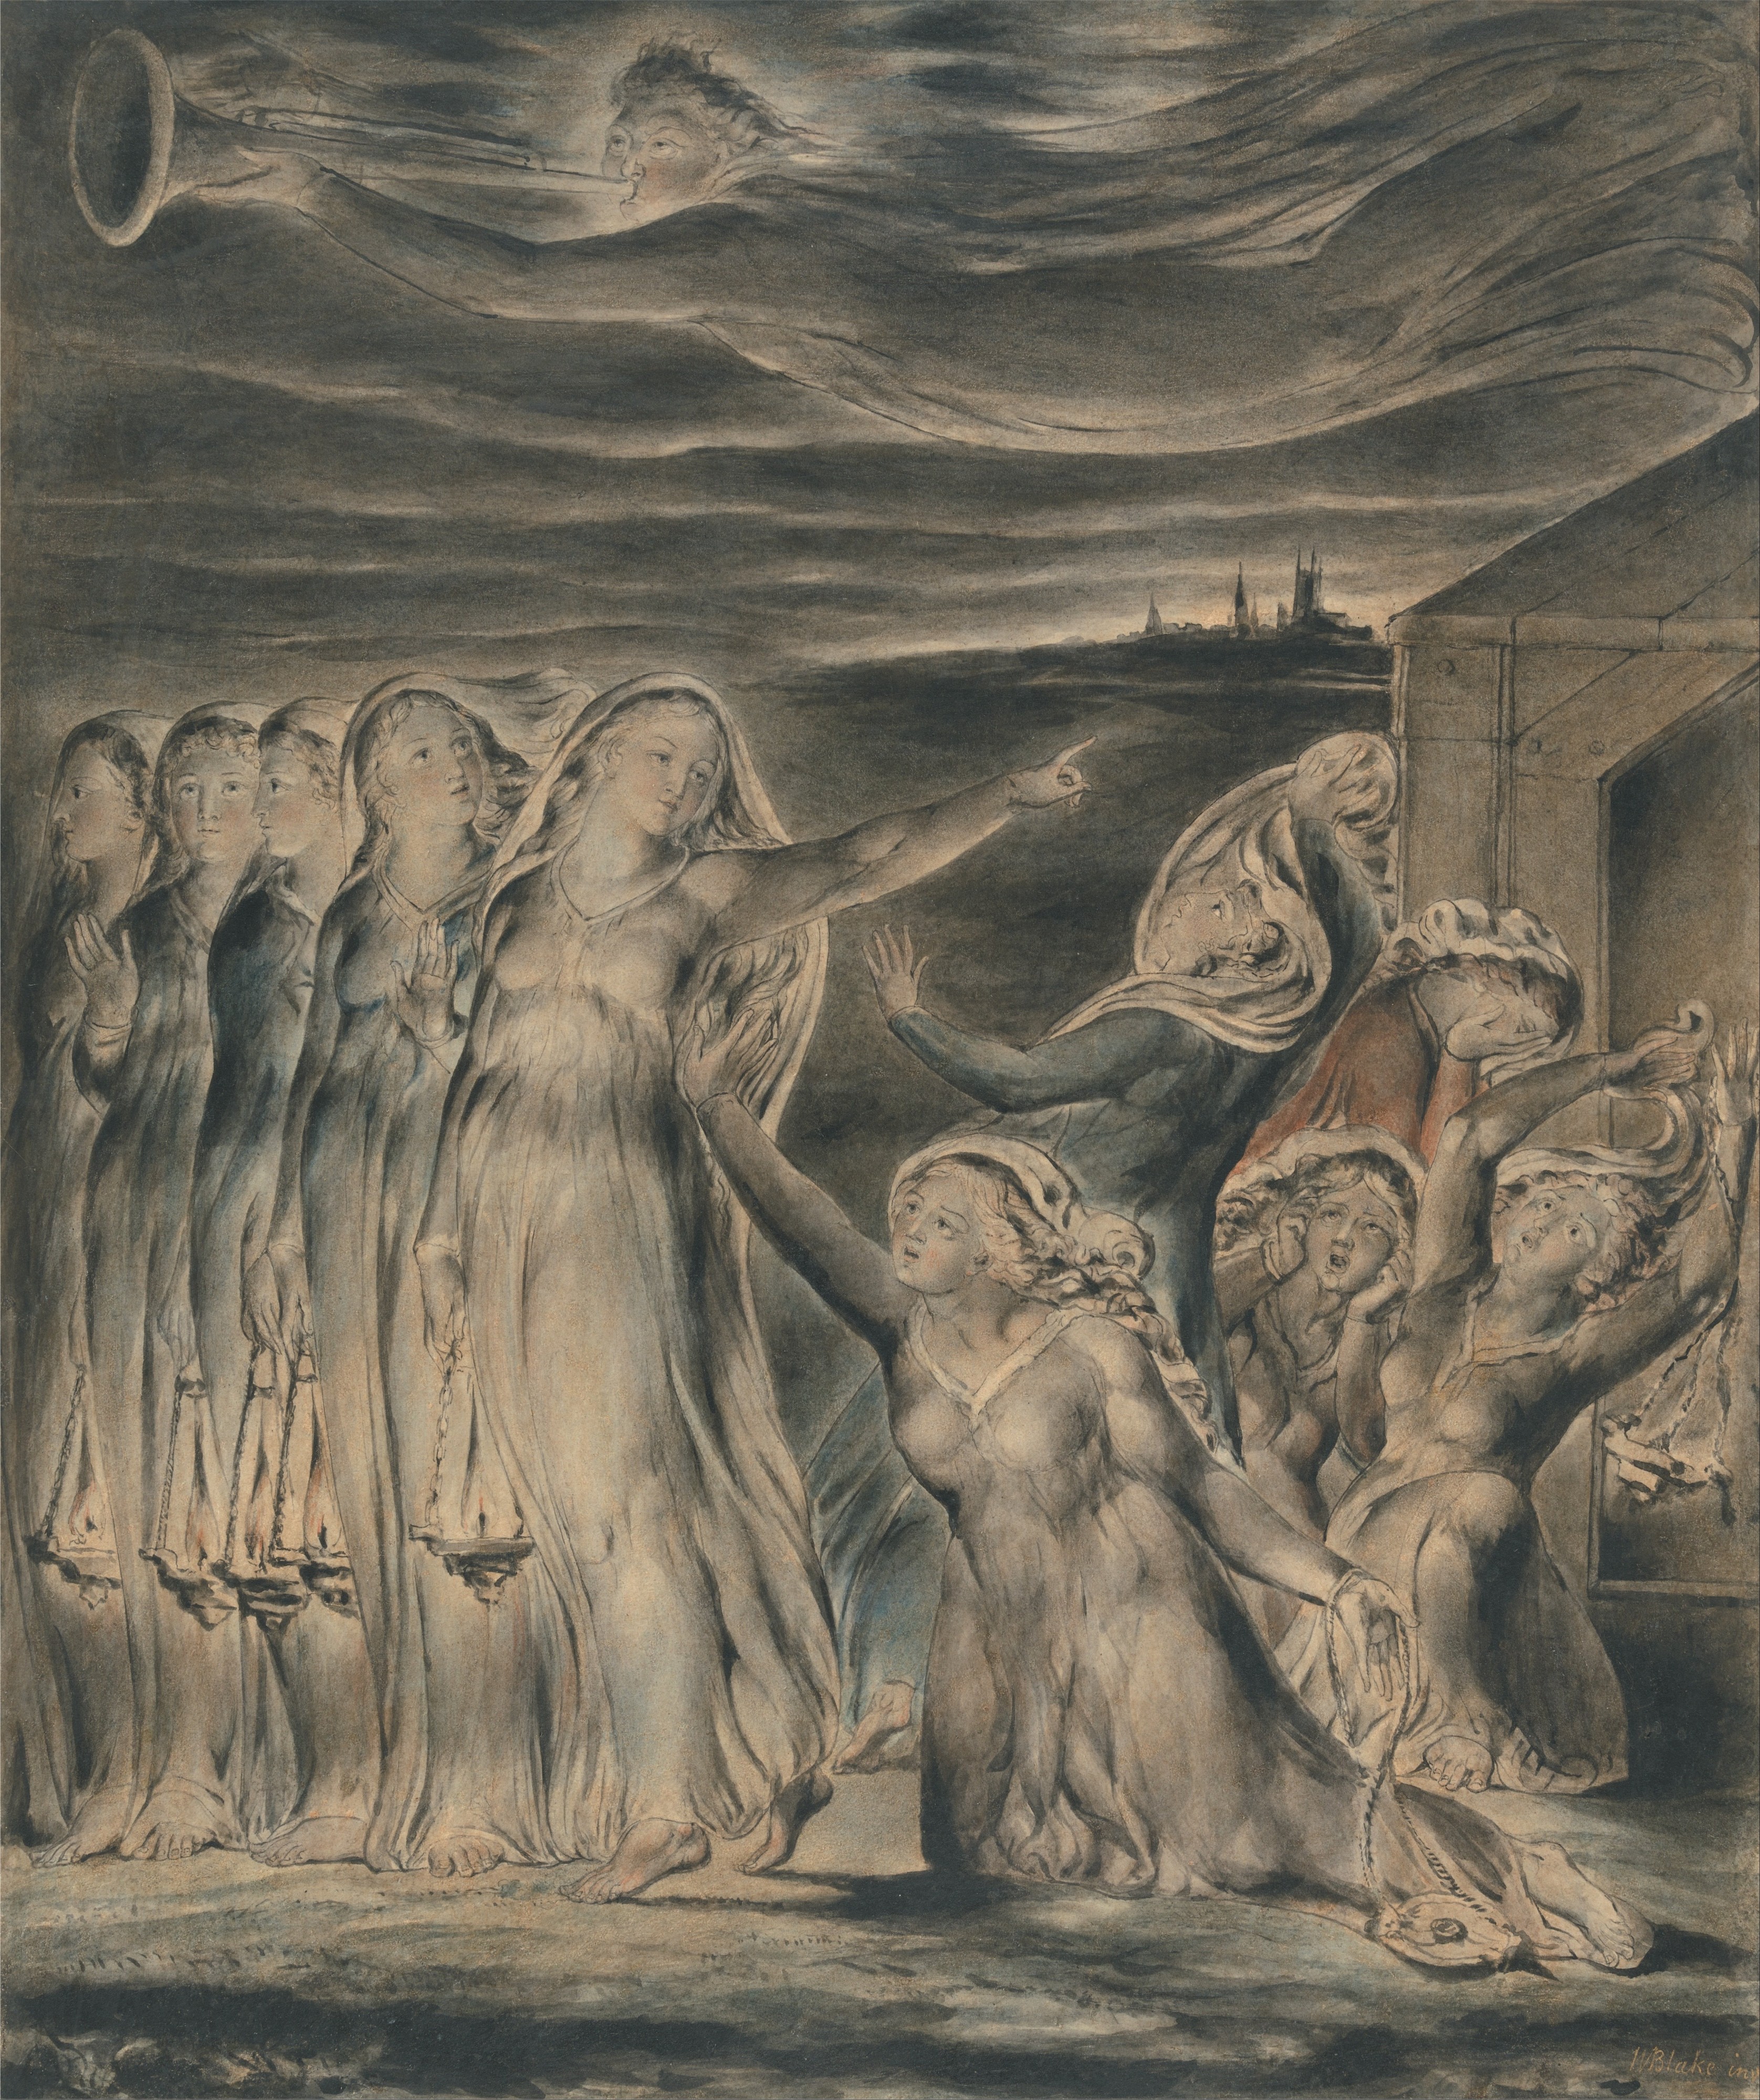 William Blake - The Parable of the Wise and Foolish Virgins - Google Art Project